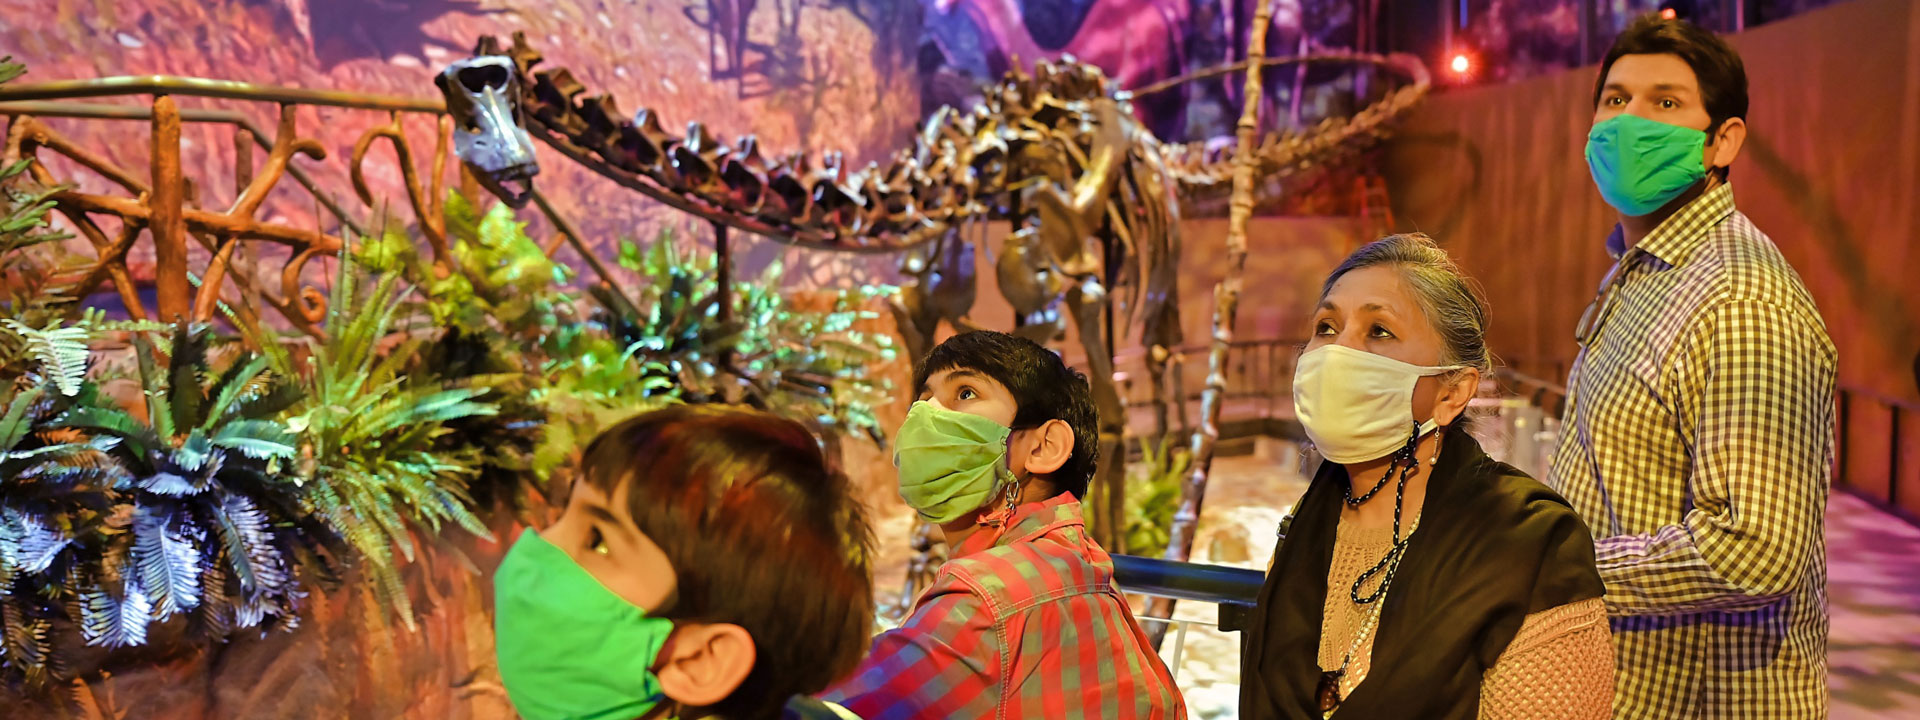 Family standing in front of a sauropod fossil with the fossil's head peeking over them.